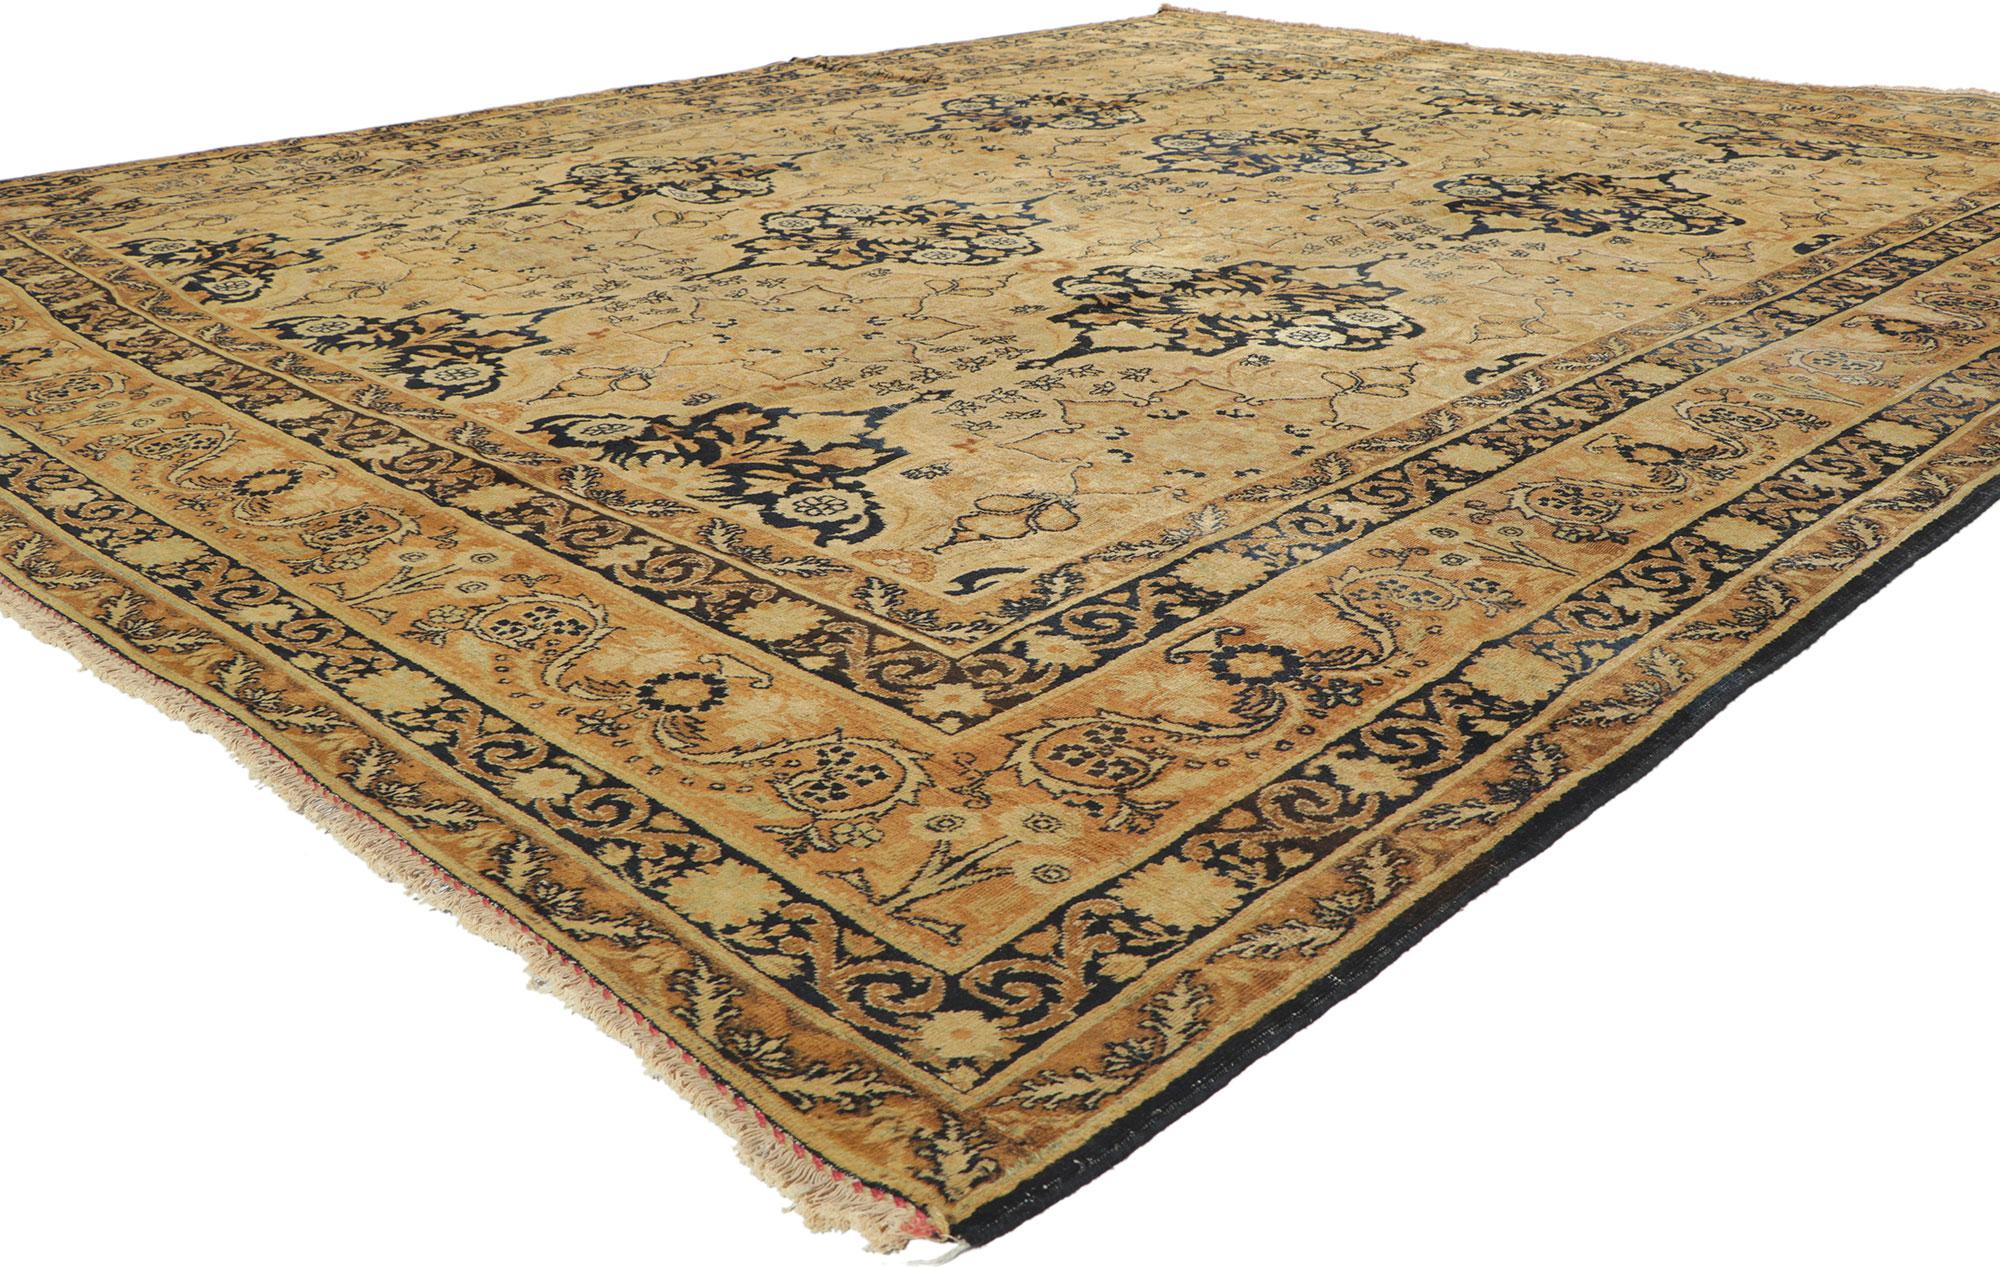 73949 Distressed Antique Persian Yazd Rug, 09'10 x 12'02. Yazd rugs, hailing from the historic city of Yazd nestled in central Iran, have earned renown for their unmatched quality, intricate craftsmanship, and attention to detail. Crafted from the